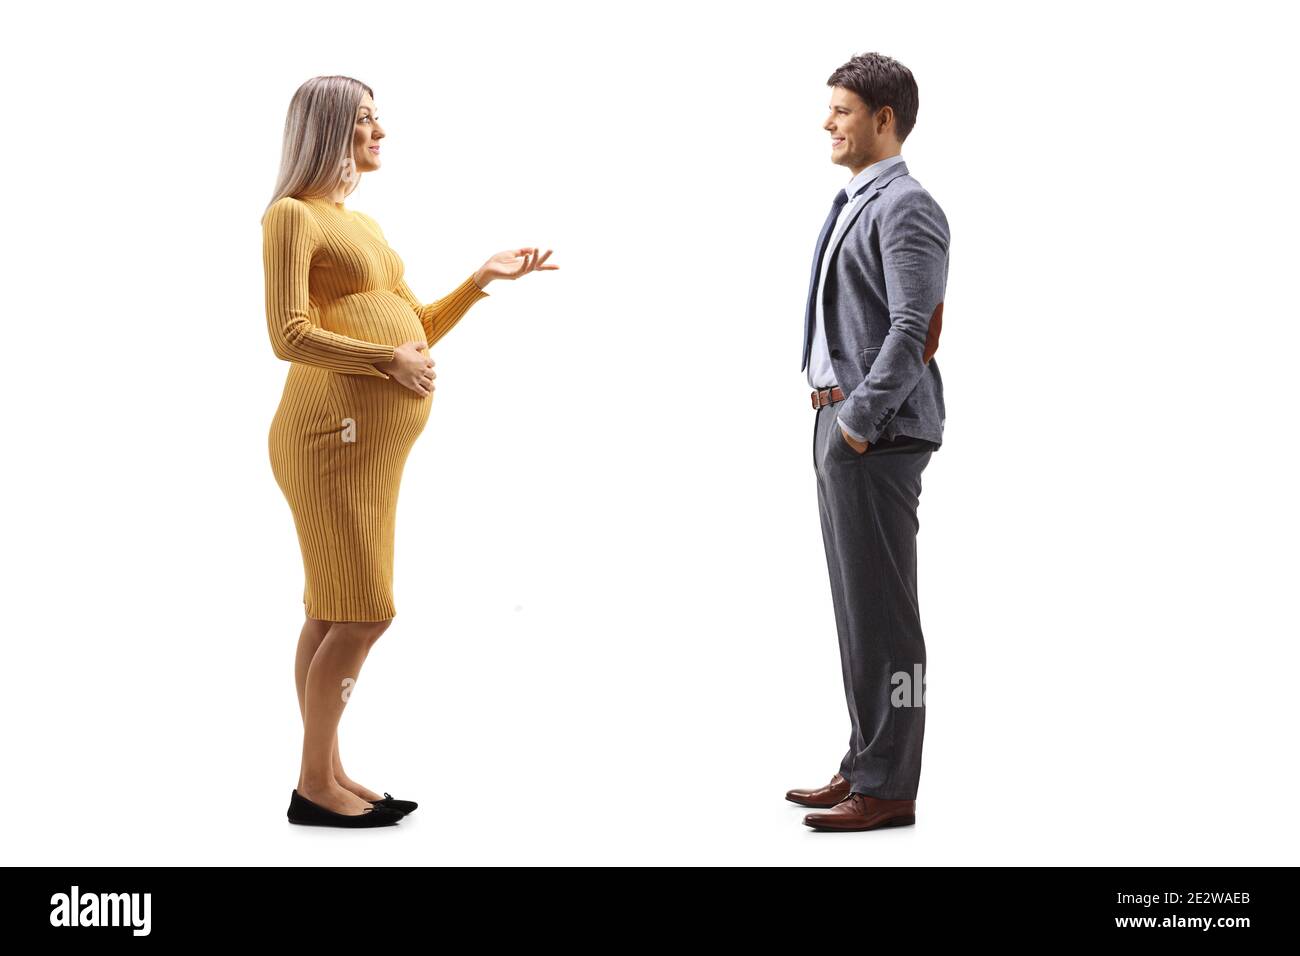 Full length profile shot of a pregnant woman talking to her husband isolated on white background Stock Photo